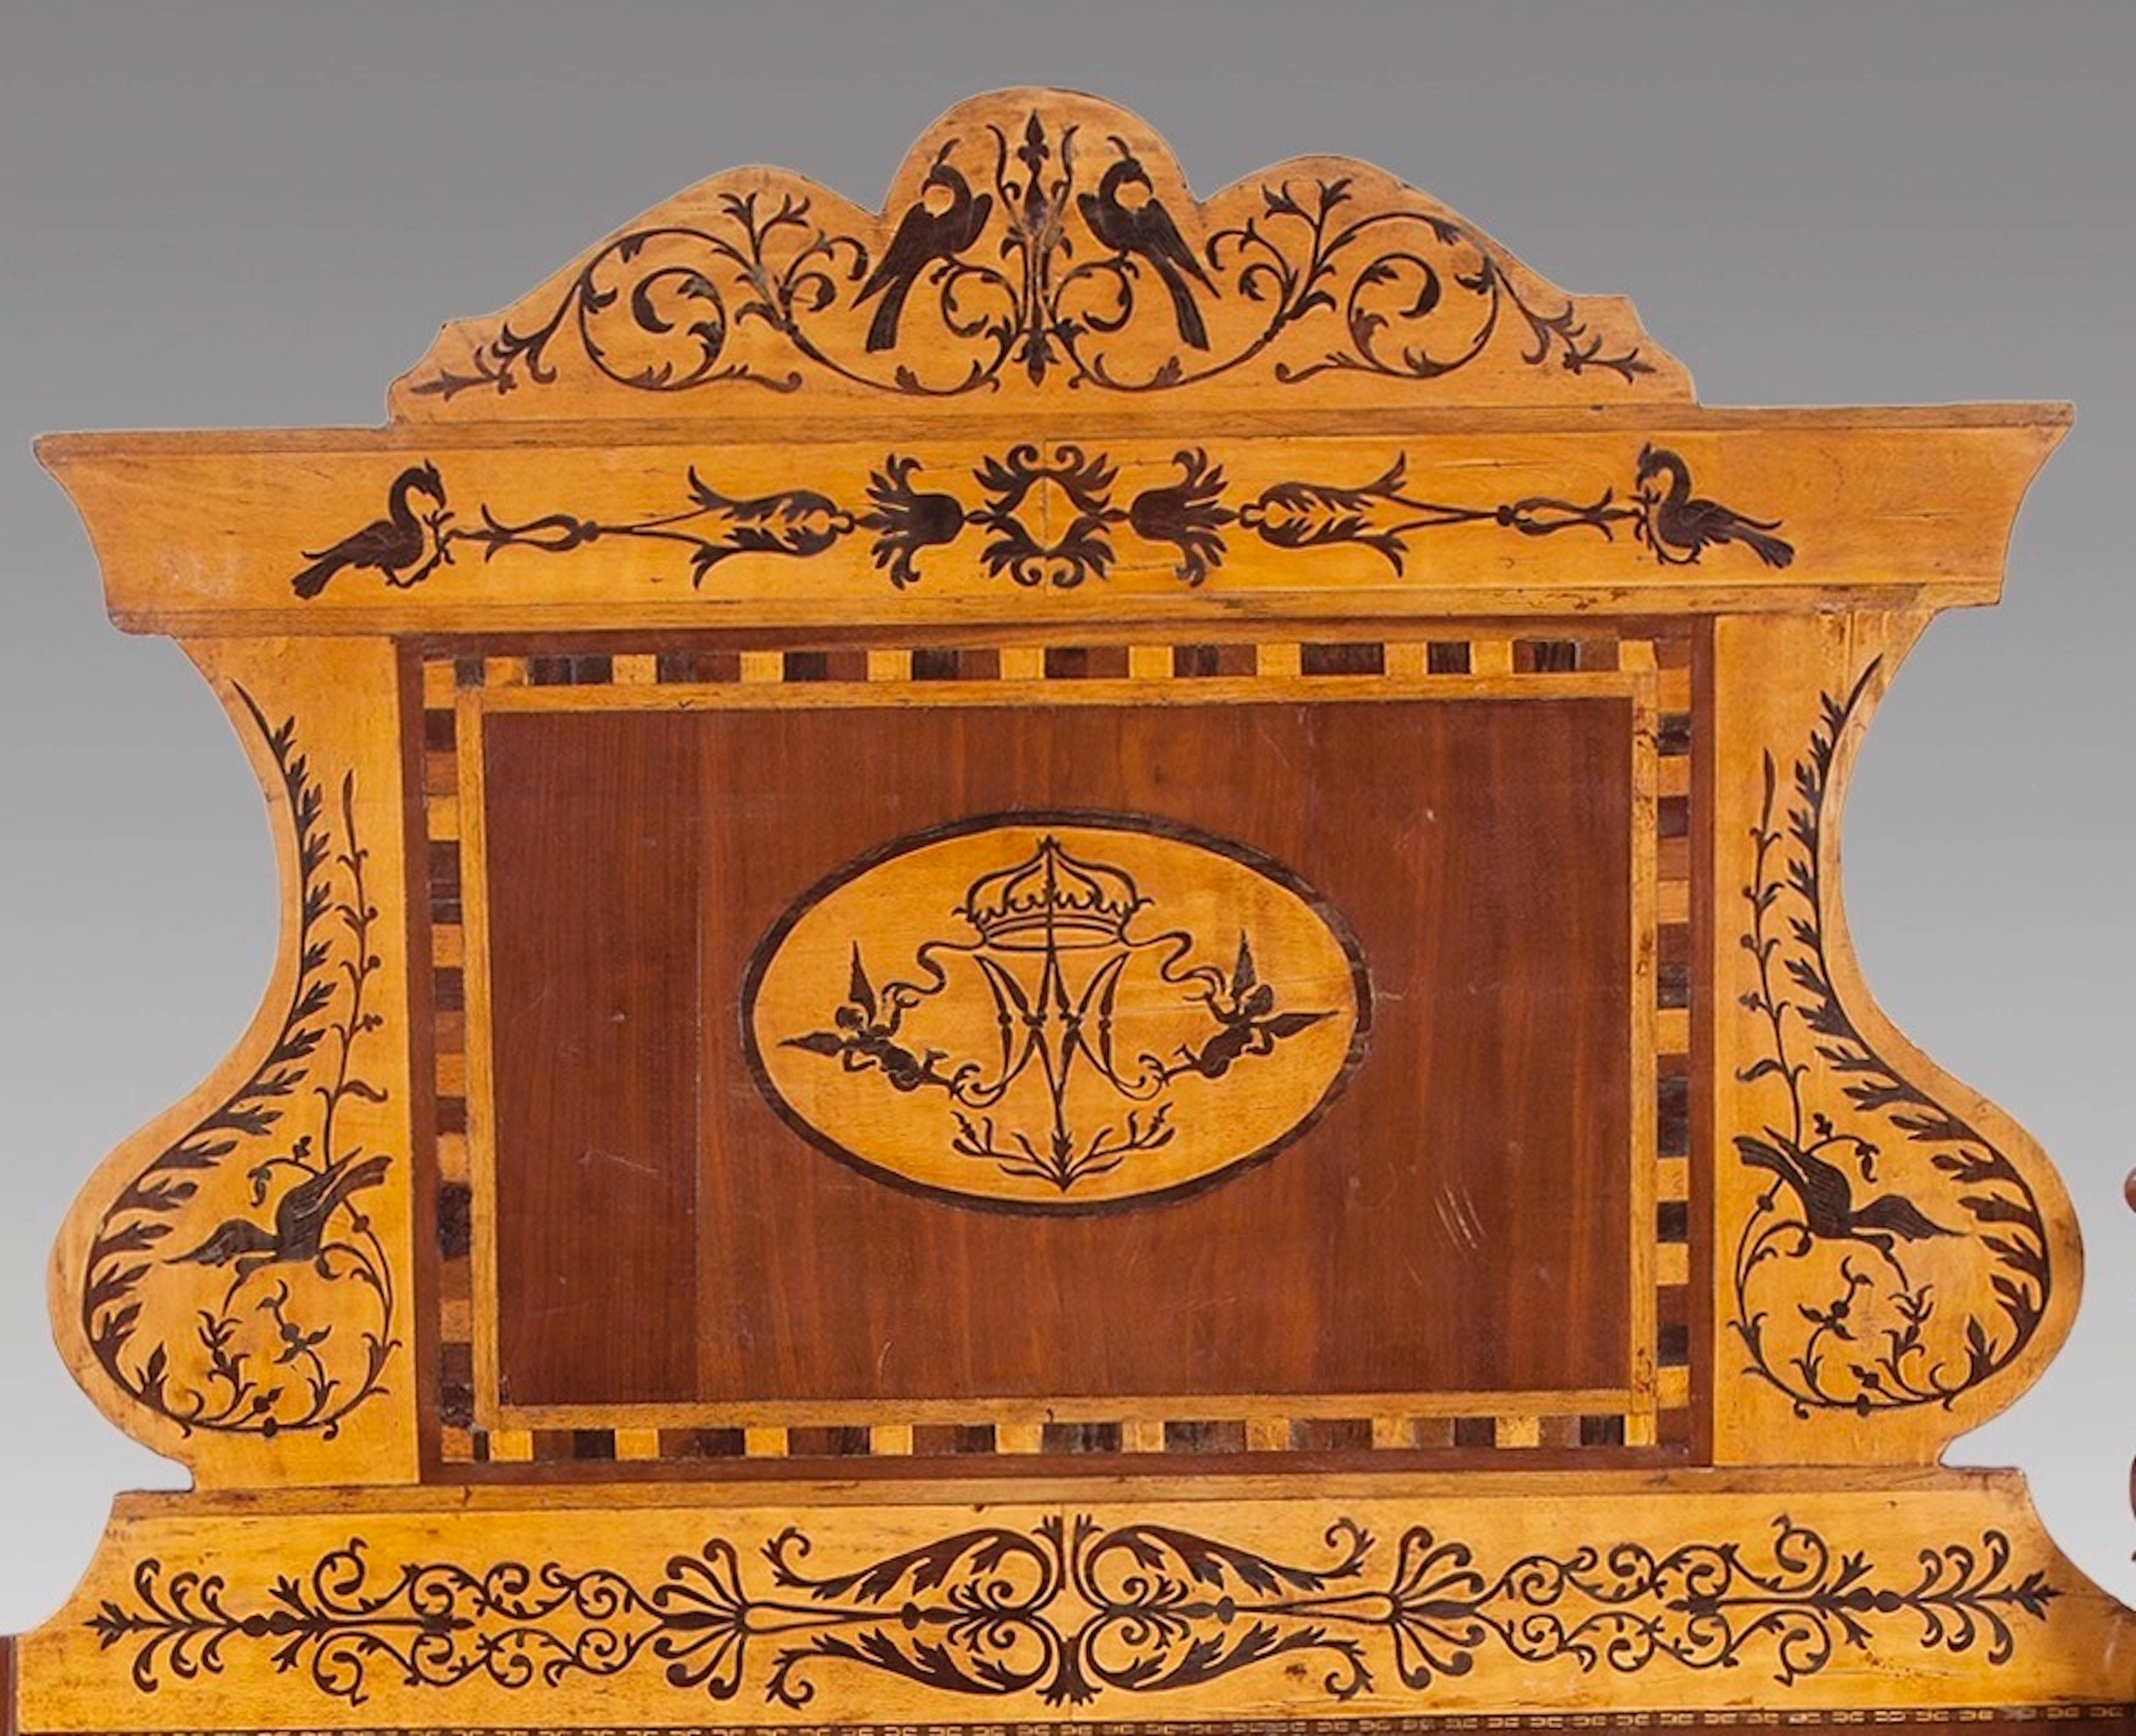 four-poster bed in mahogany from Majorque (Spain).
Hedboard in palosanto, mahogany and lemongrass marquetry,
circa 1850.

Interior measures:
Length: 179 cm. (can be expanded).
Width: 108 cm.